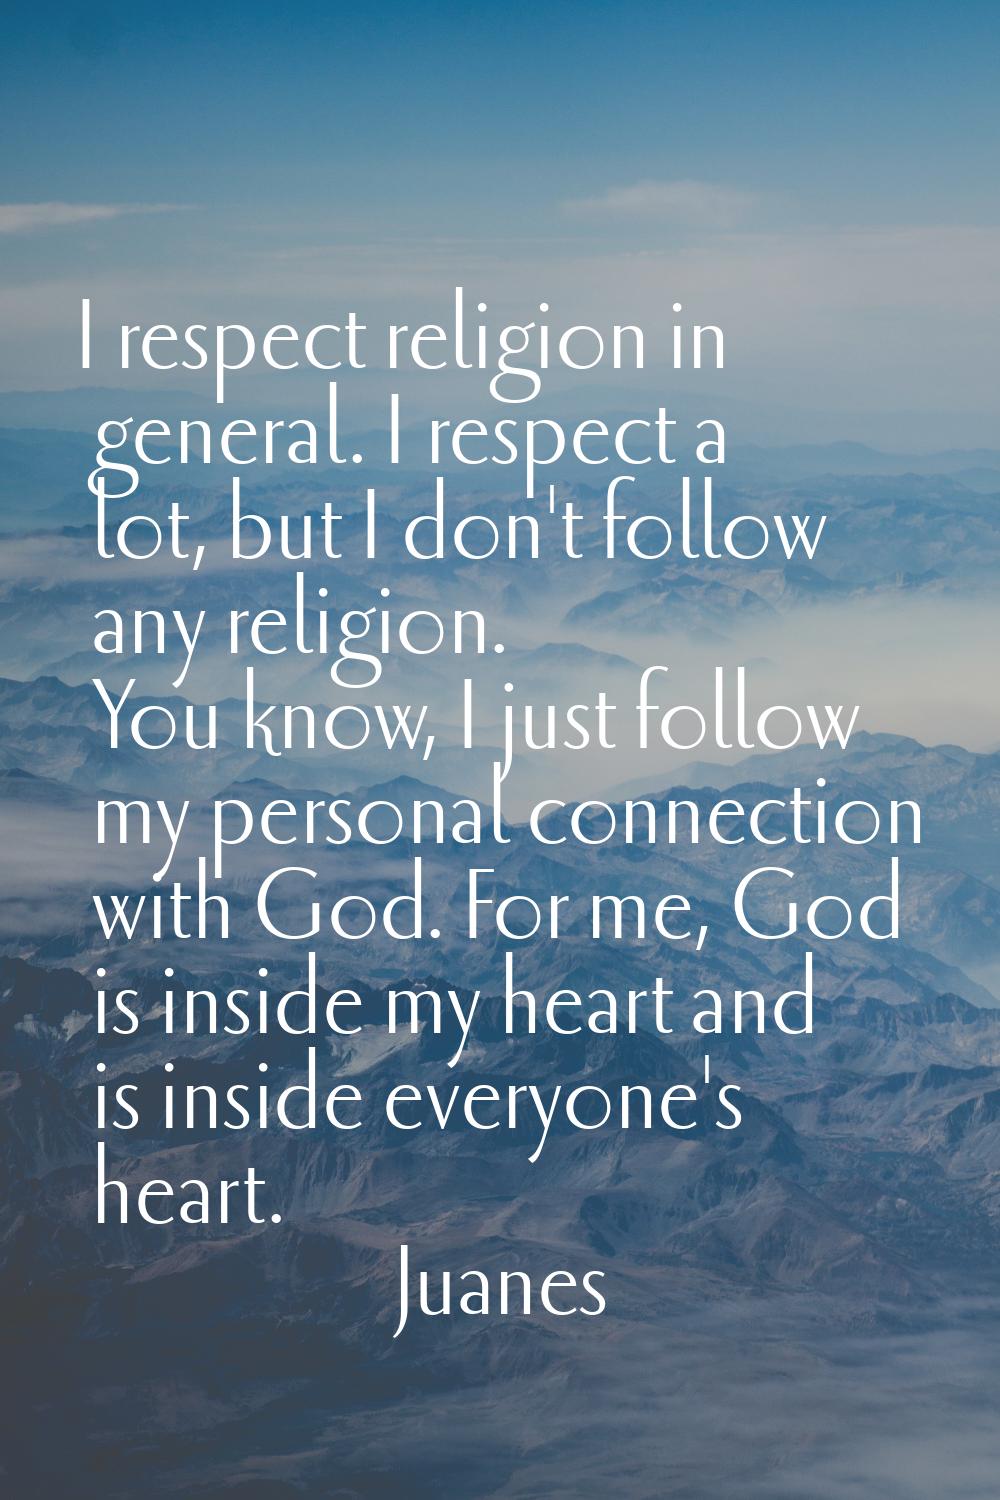 I respect religion in general. I respect a lot, but I don't follow any religion. You know, I just f